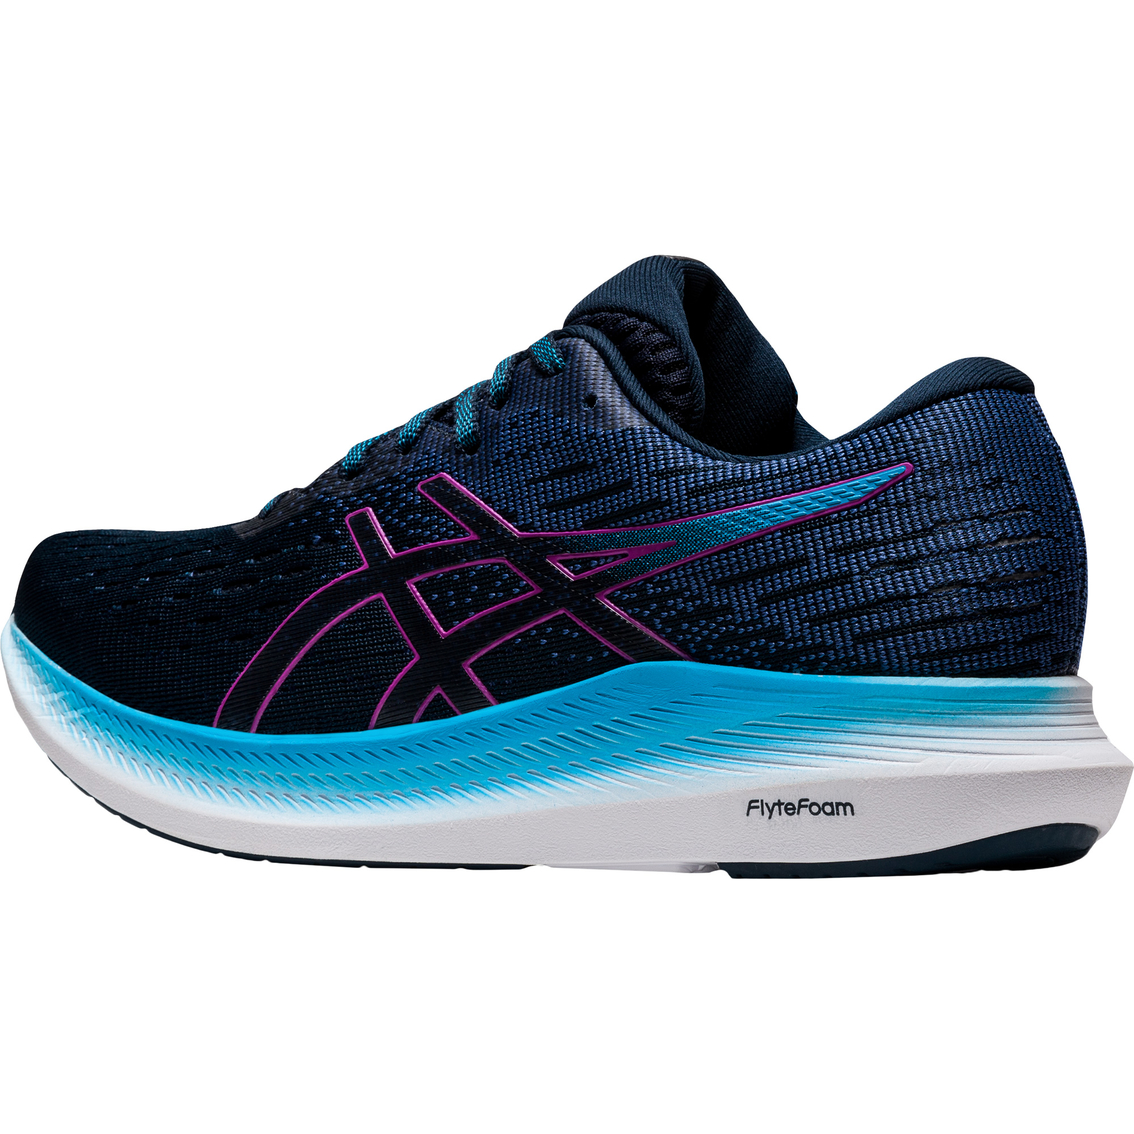 Asics Women's Evoride 2 Running Shoes | Running | Shoes | Shop The Exchange